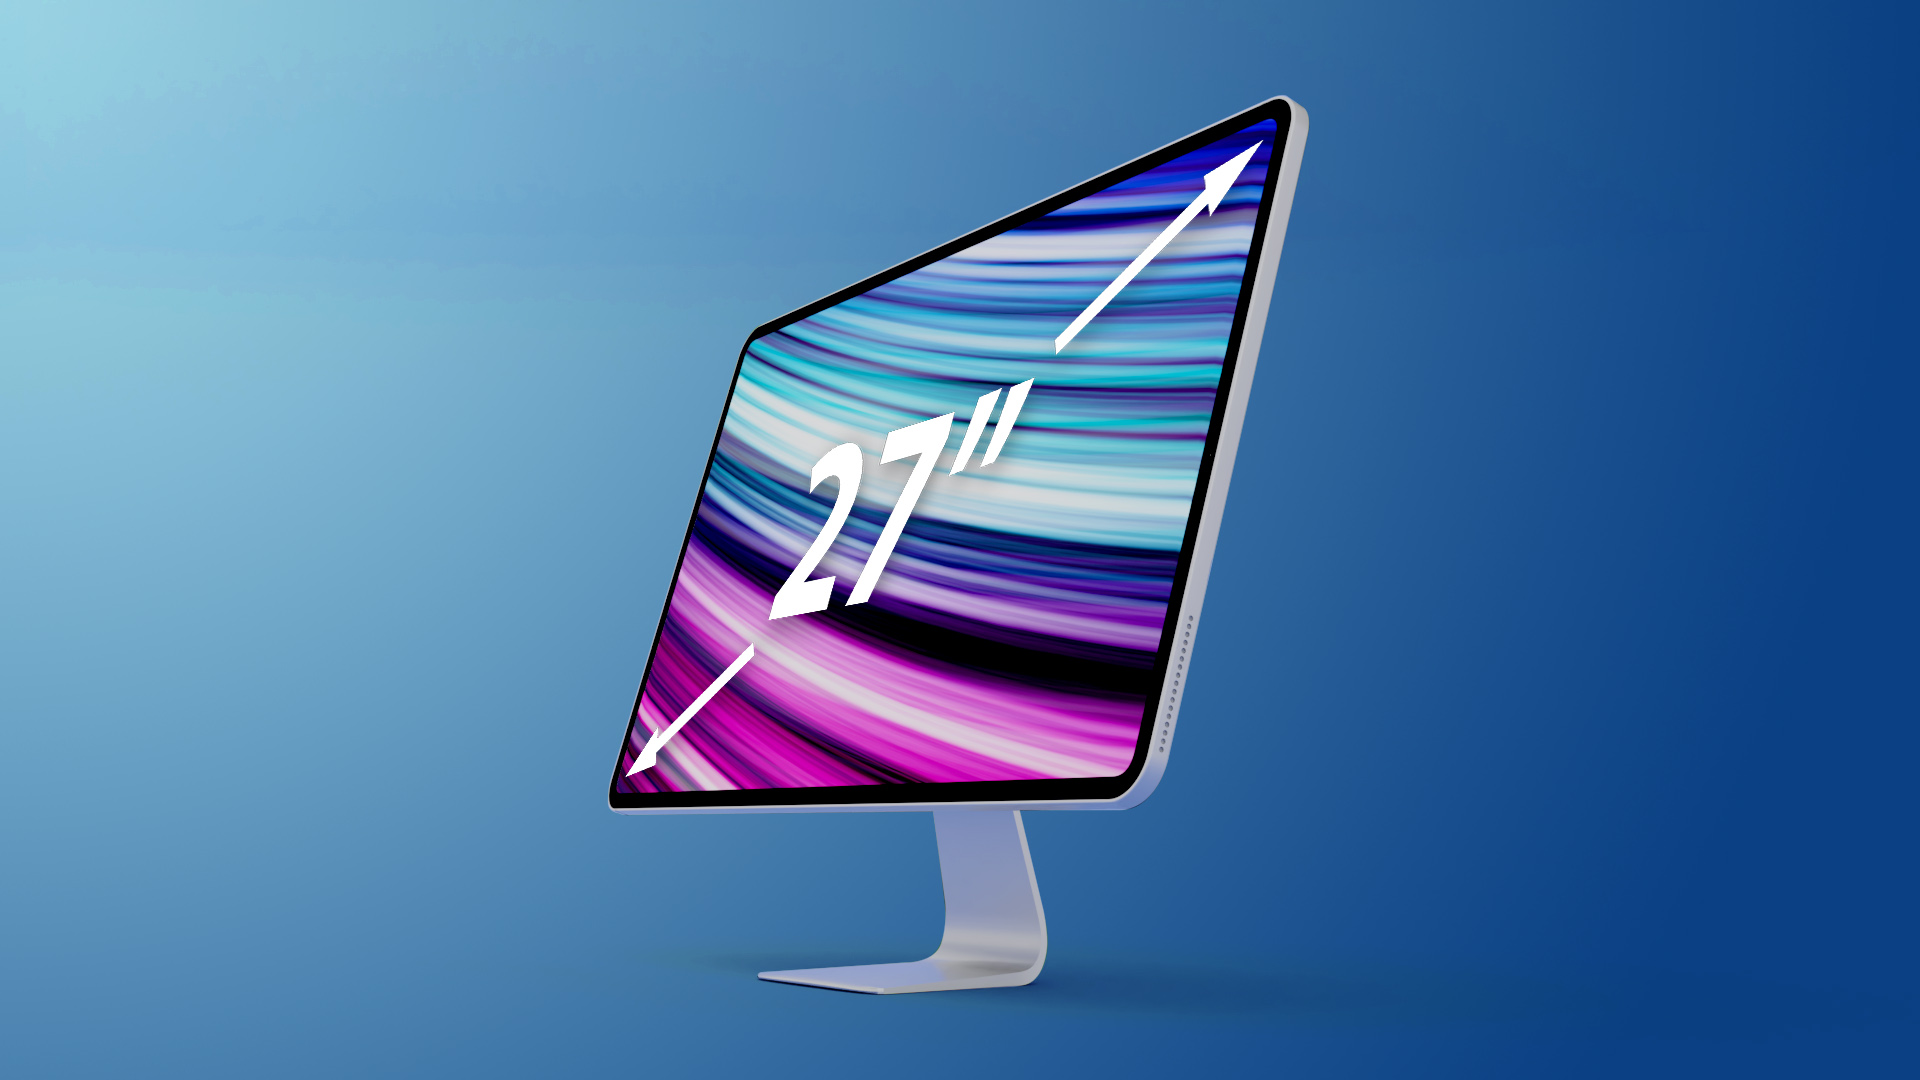 2020-iMac-Mockup-Feature-27-inch-text.jpg